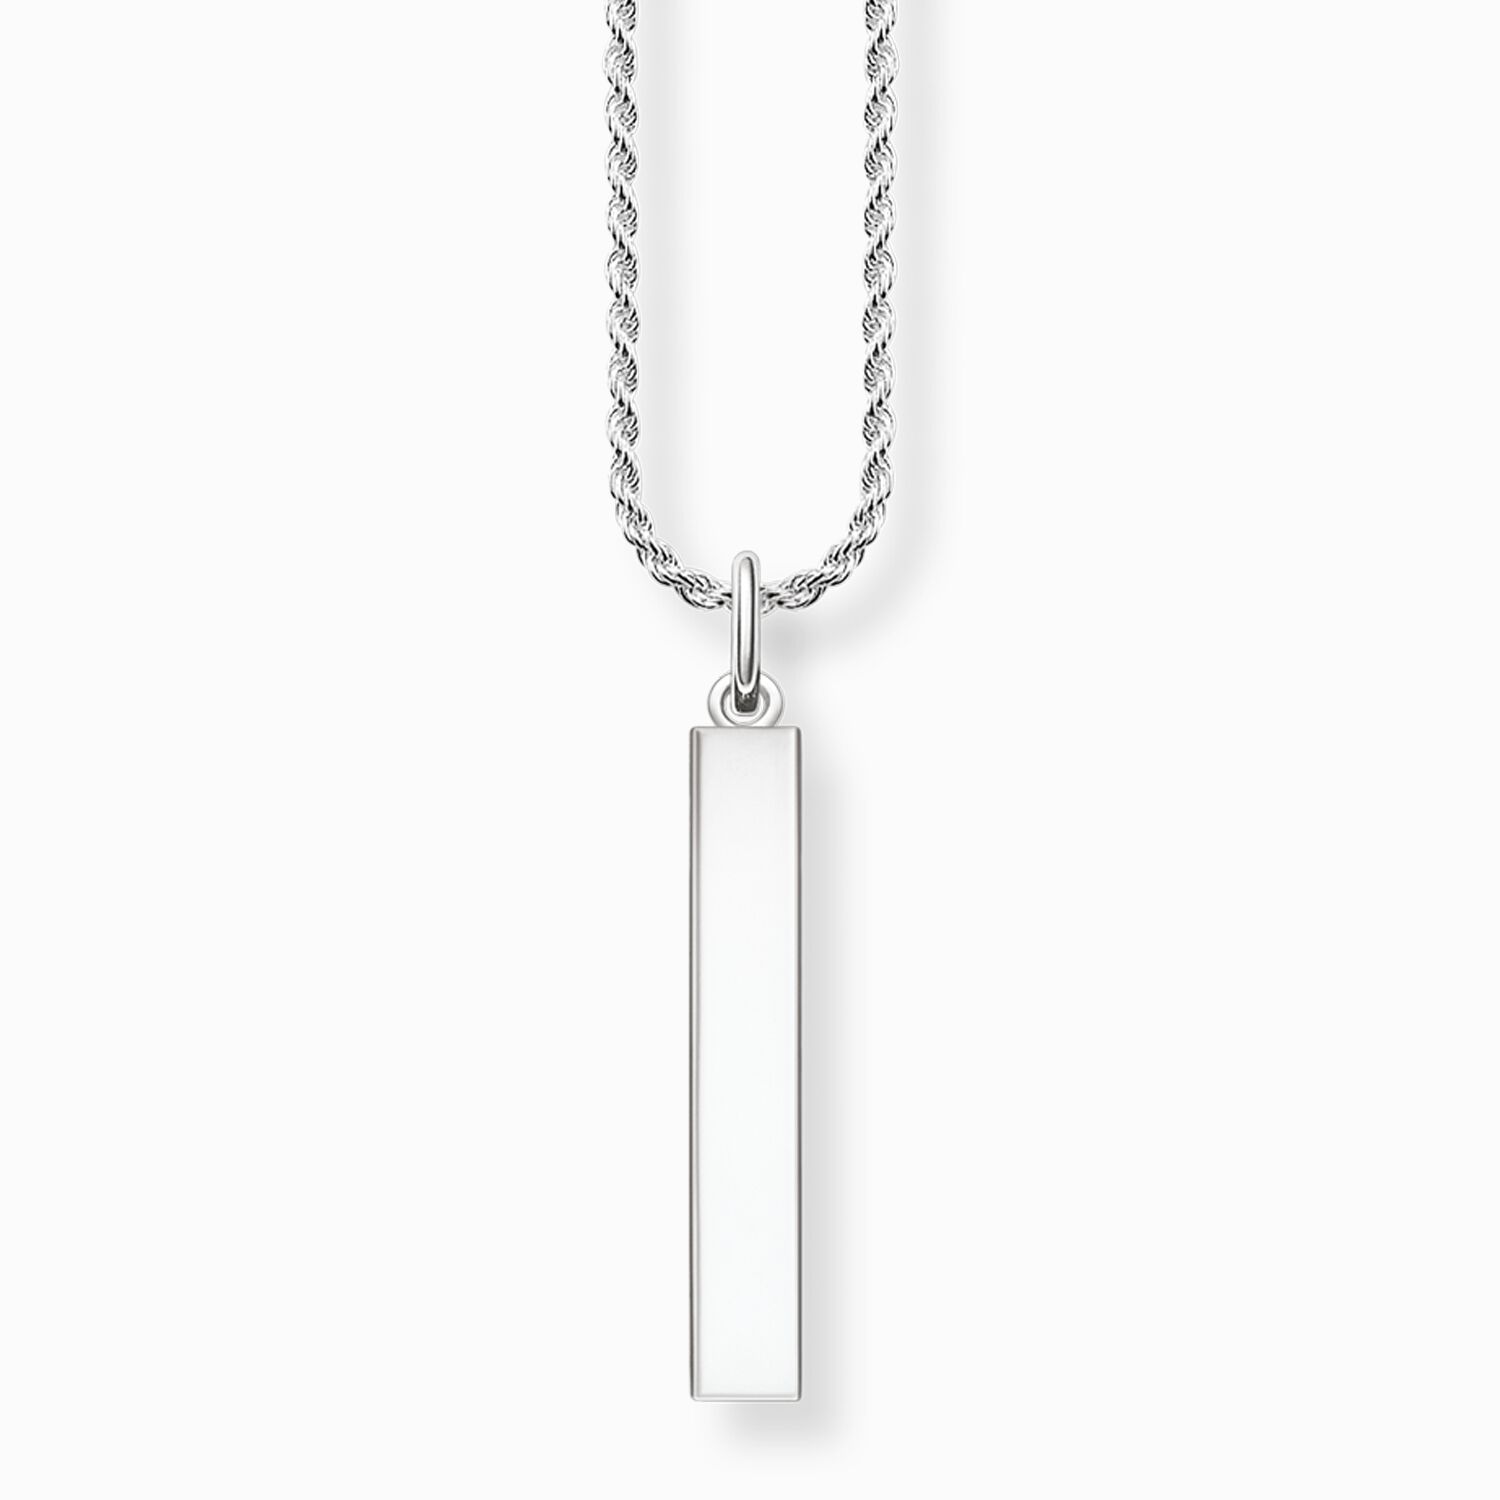 Necklace classic from the  collection in the THOMAS SABO online store